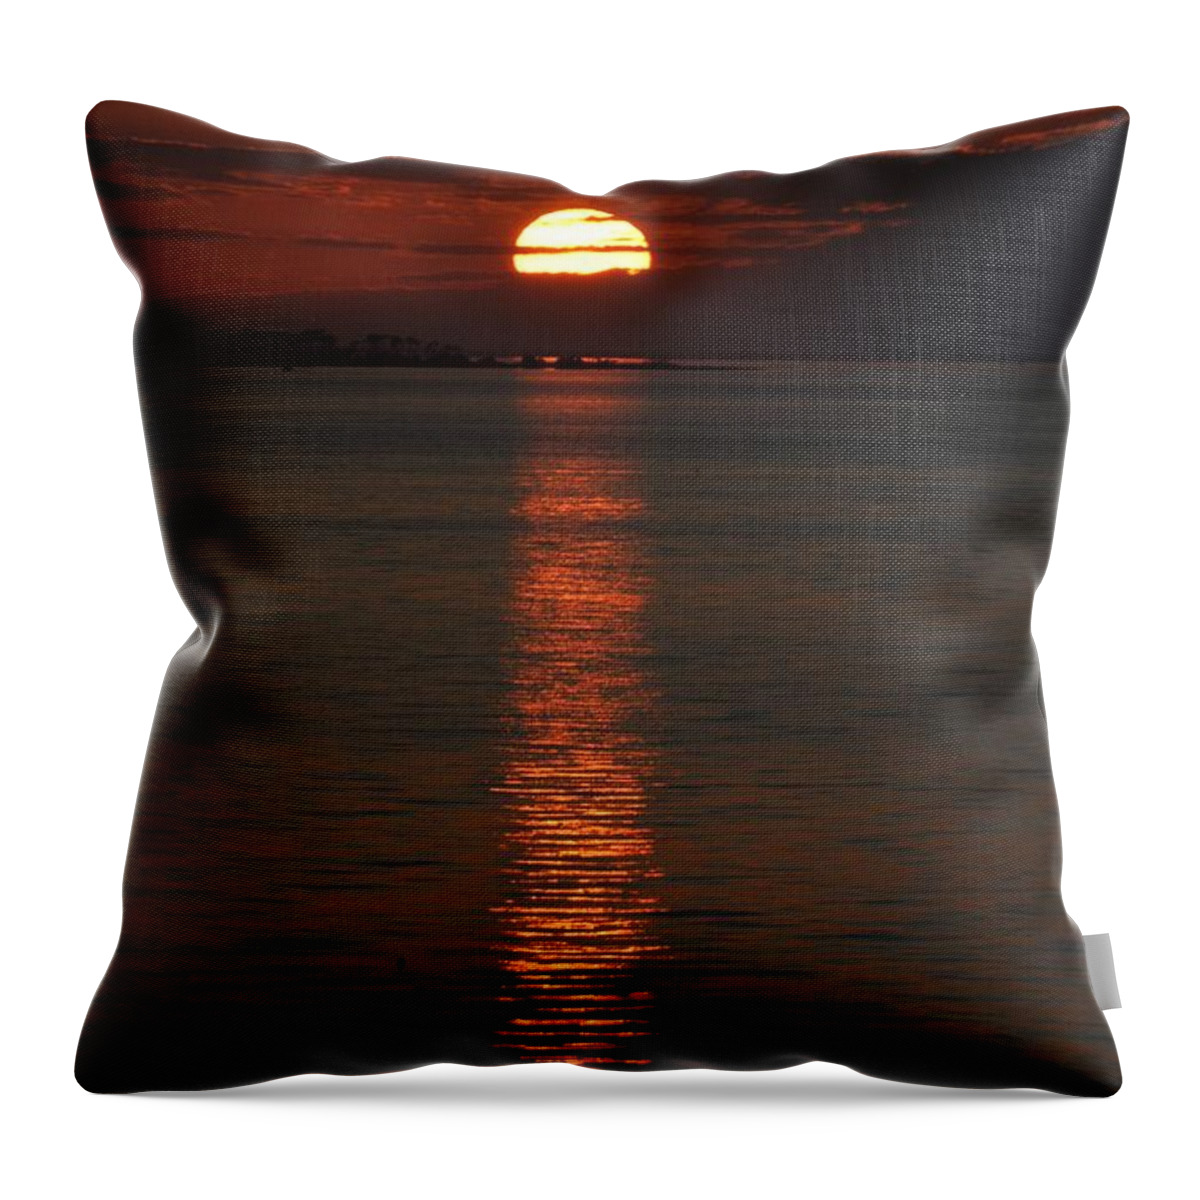 Sunsets Throw Pillow featuring the photograph Goodnight Sun by Jan Amiss Photography